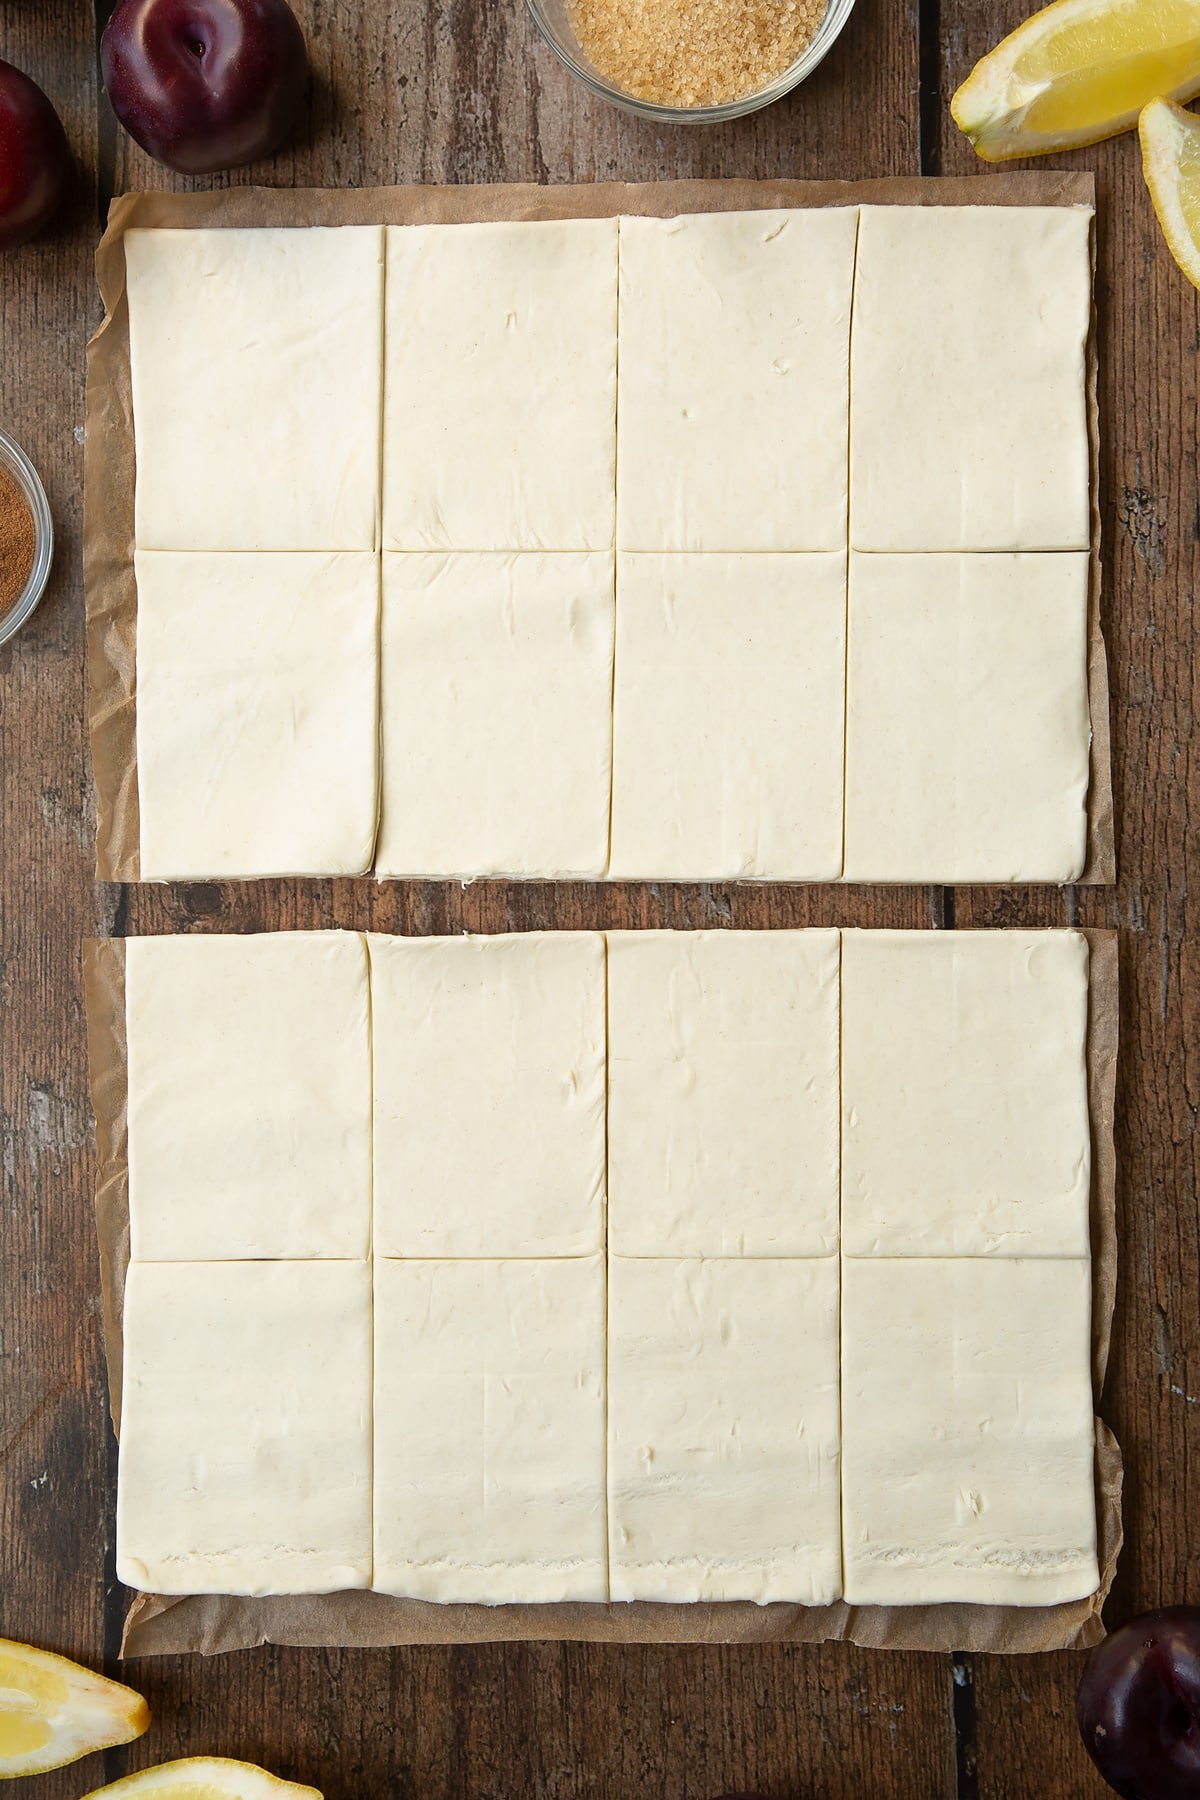 A puff pastry sheet cut into 16 pieces. The sheet is cut in half. Ingredients to make a plum pastry recipe surround the pastry.